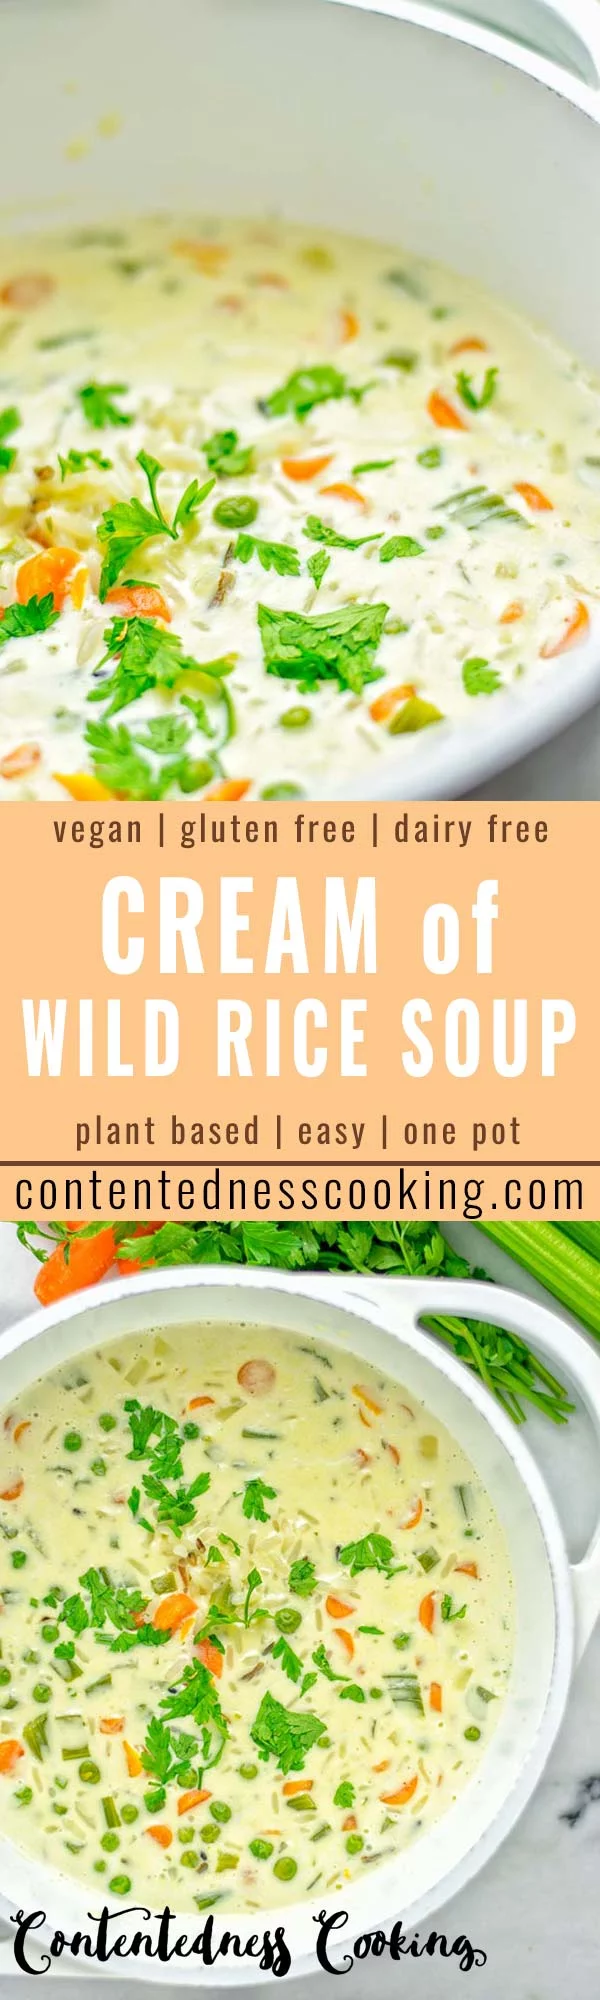 This Cream of Wild Rice Soup is entirely vegan, gluten free and super easy to make in one pot. An amazing soup for dinner, lunch, meal preparation, work lunch and the holidays that the whole family will love. #vegan #dairyfree #glutenfree #vegetarian #onepotmeals #soup #mealprep #worklunchideas #thanksgiving #holidays #contentednesscooking #wildricesoup #wildrice #wildricerecipes #dinner #lunch